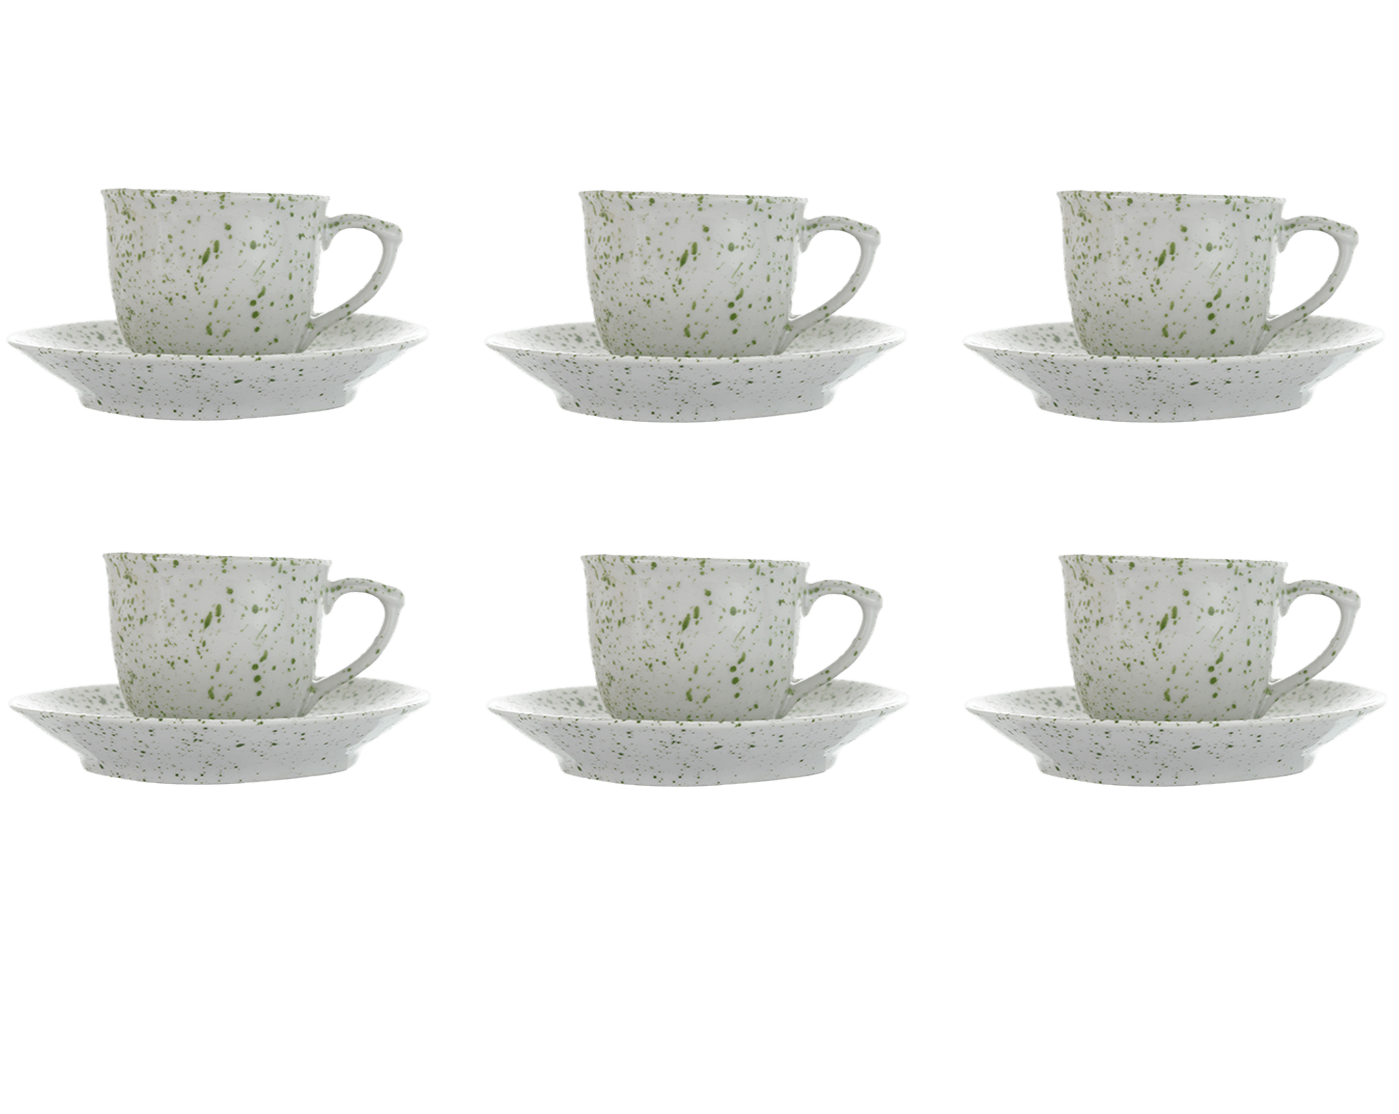 Senzo - Punti - Coffee Cup Set 6 Pieces with Saucer - Green - Porcelain - 165ml - 520001163x6